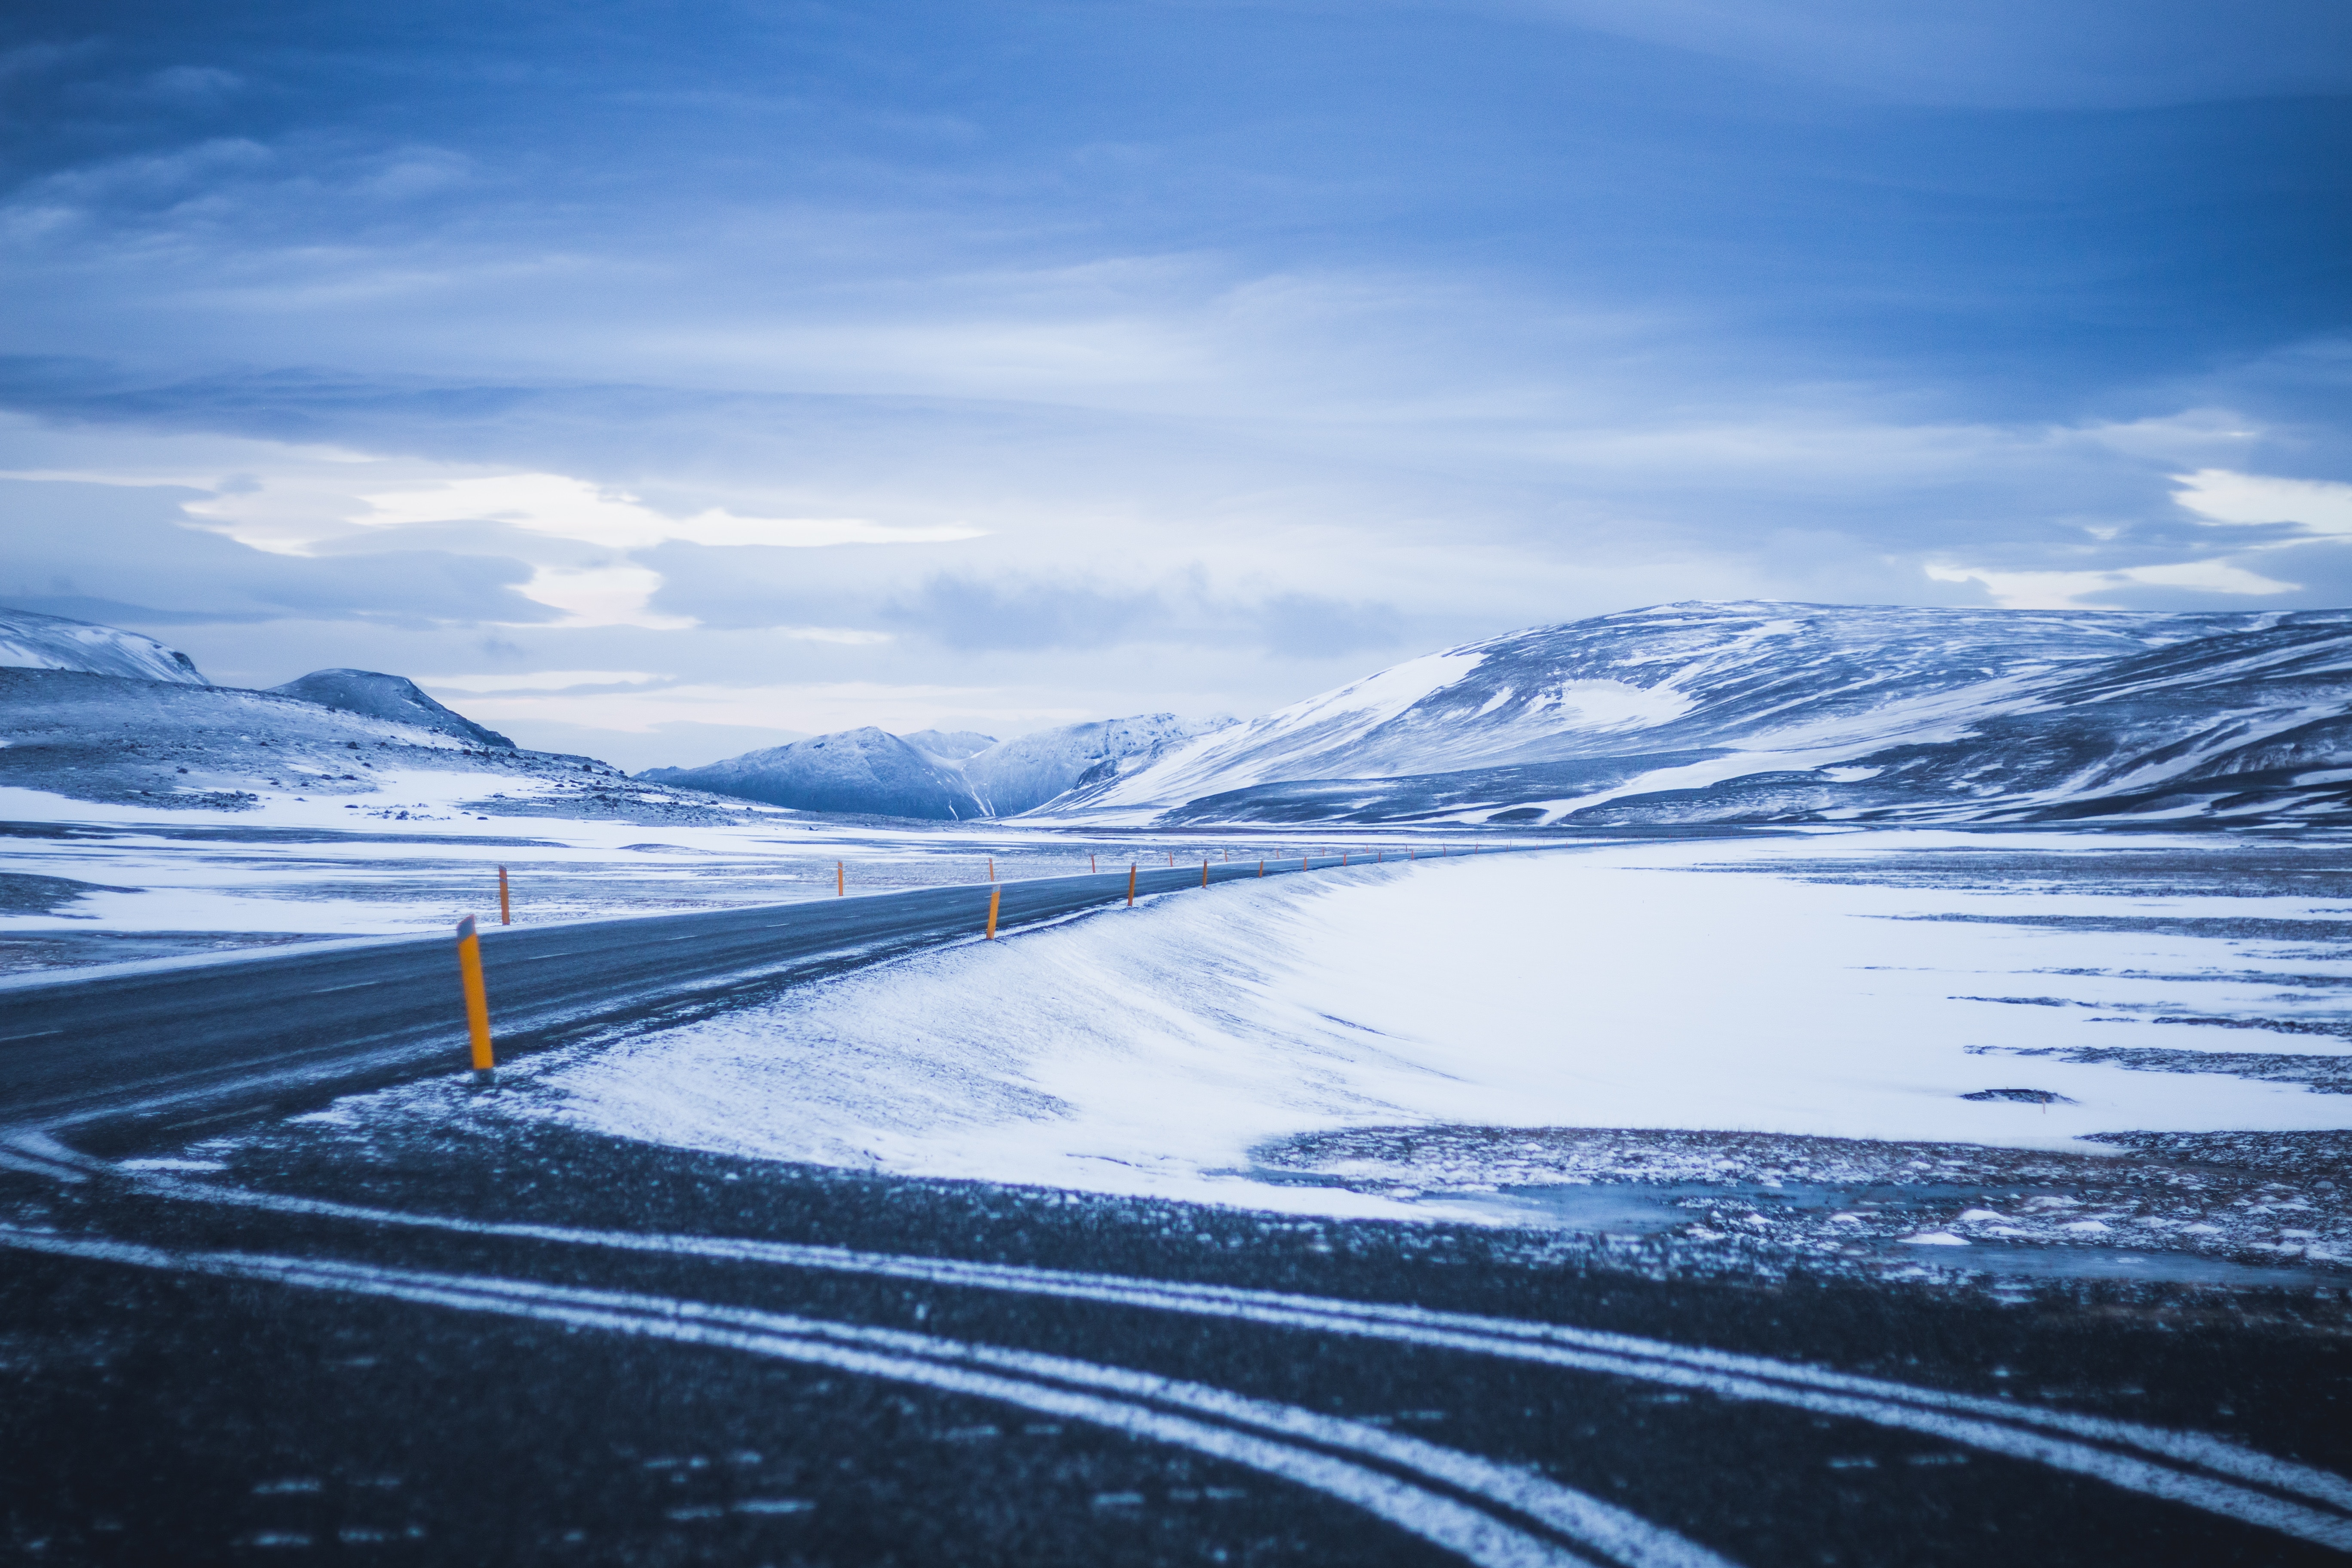 Lock Screen PC Wallpaper winter, nature, mountains, snow, road, turn, snow covered, snowbound